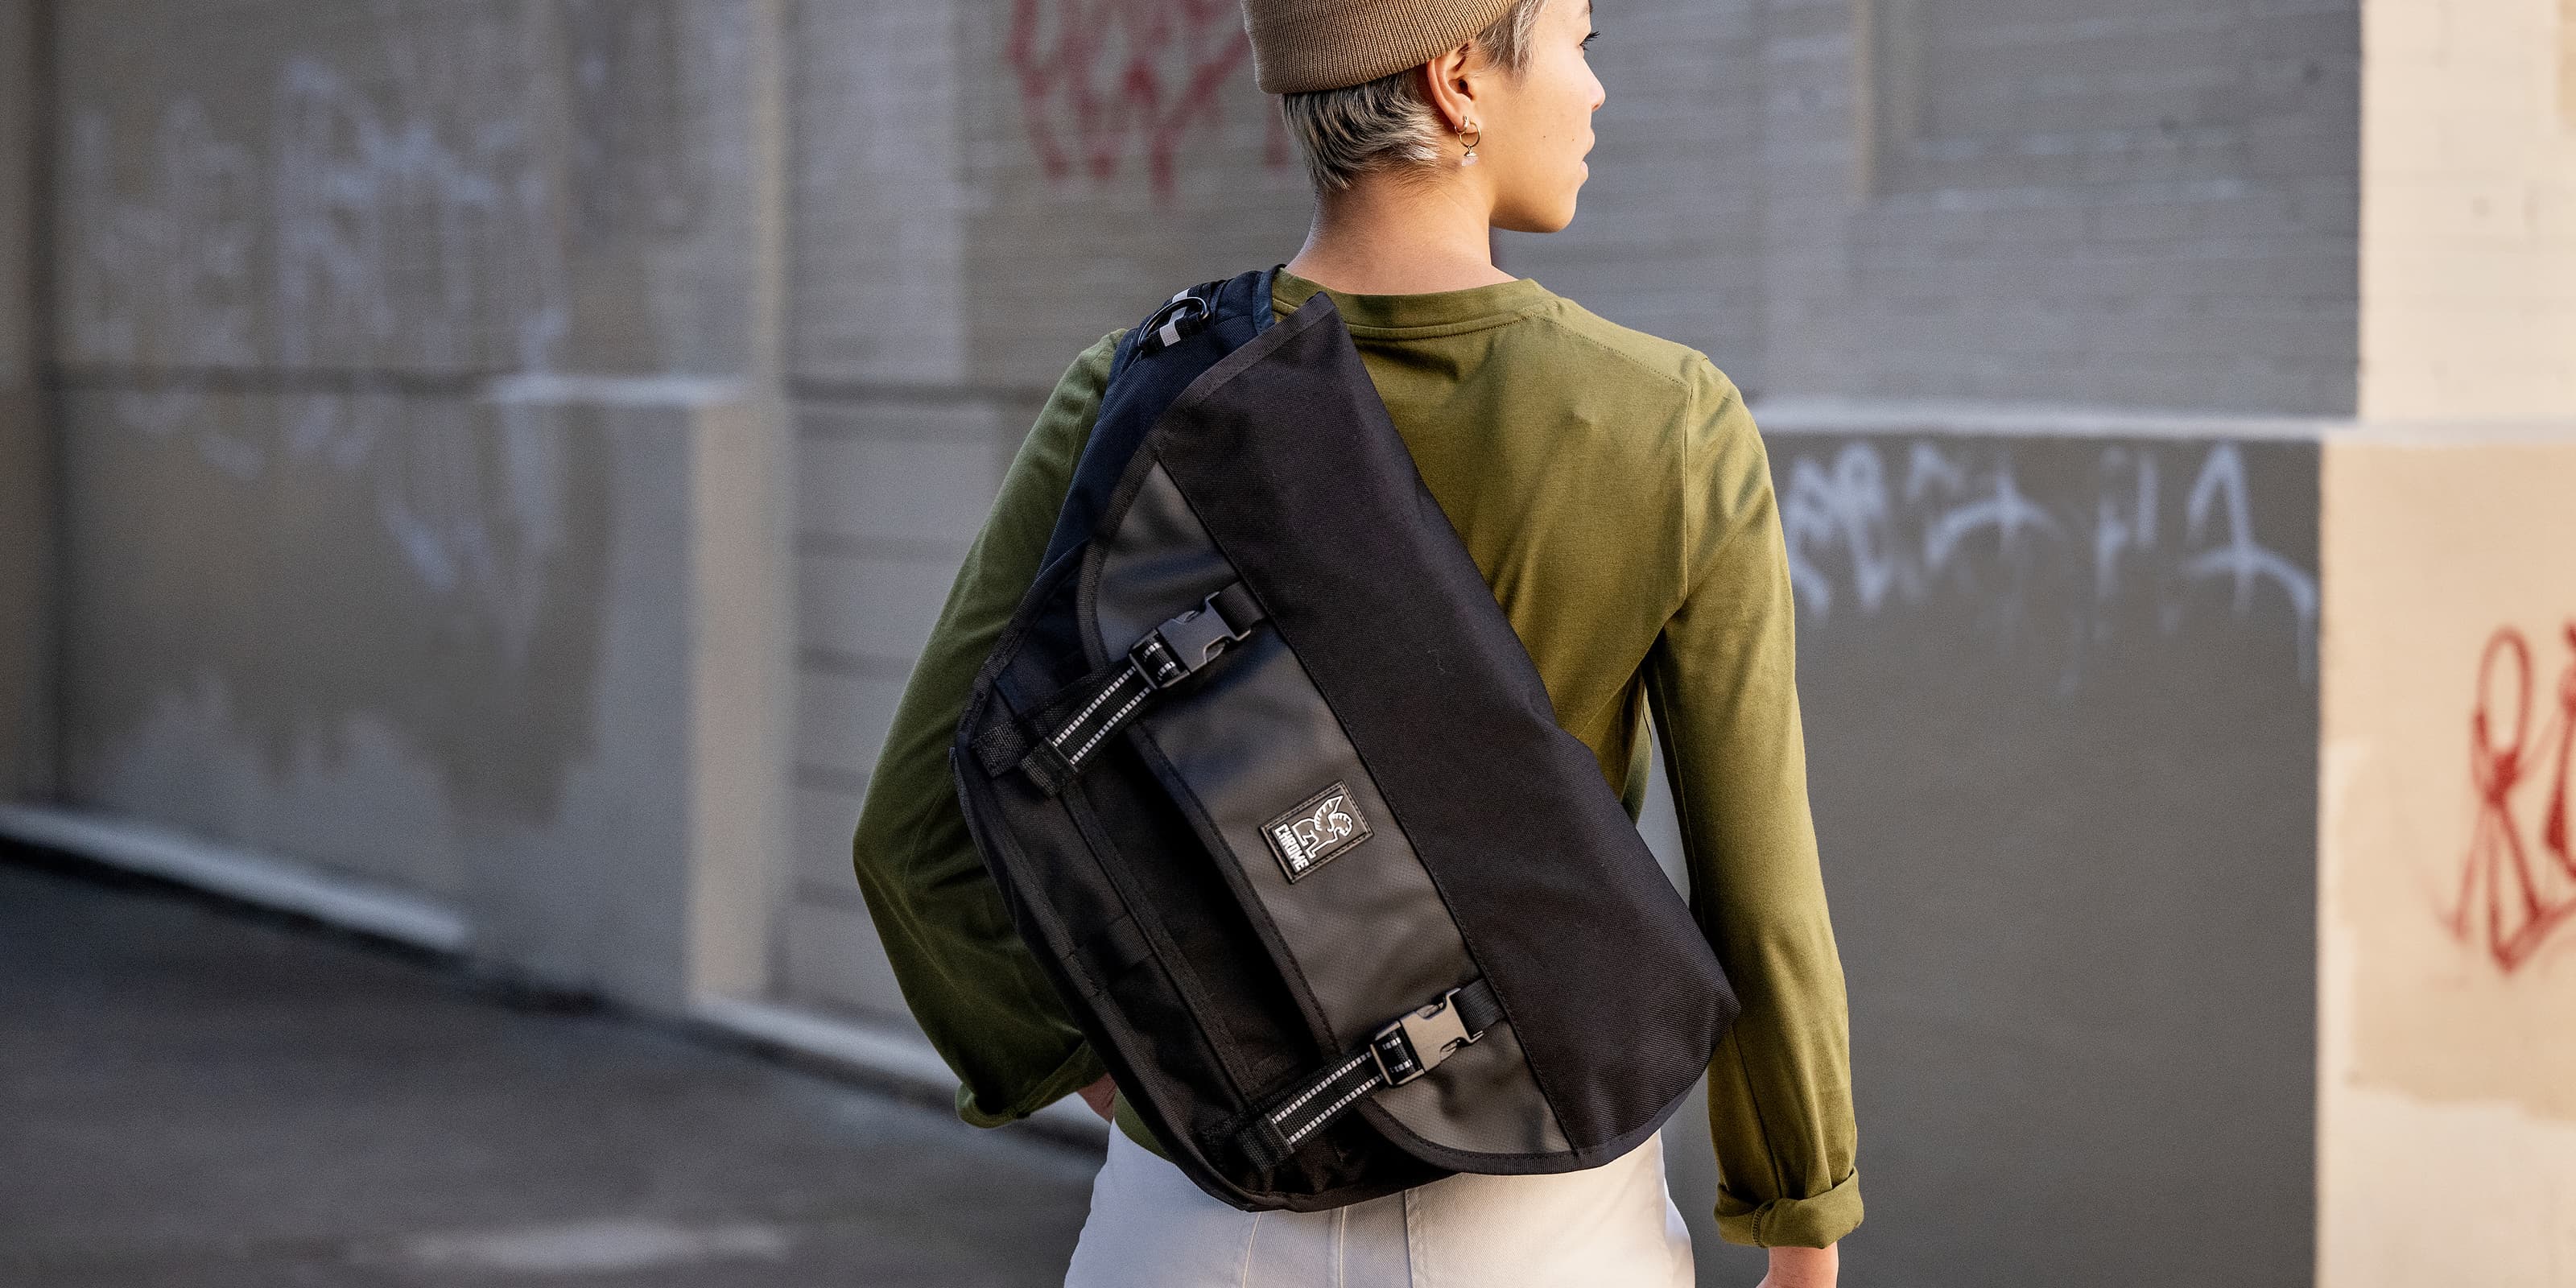 Water-resistant Mini Metro Messenger in black worn by a person